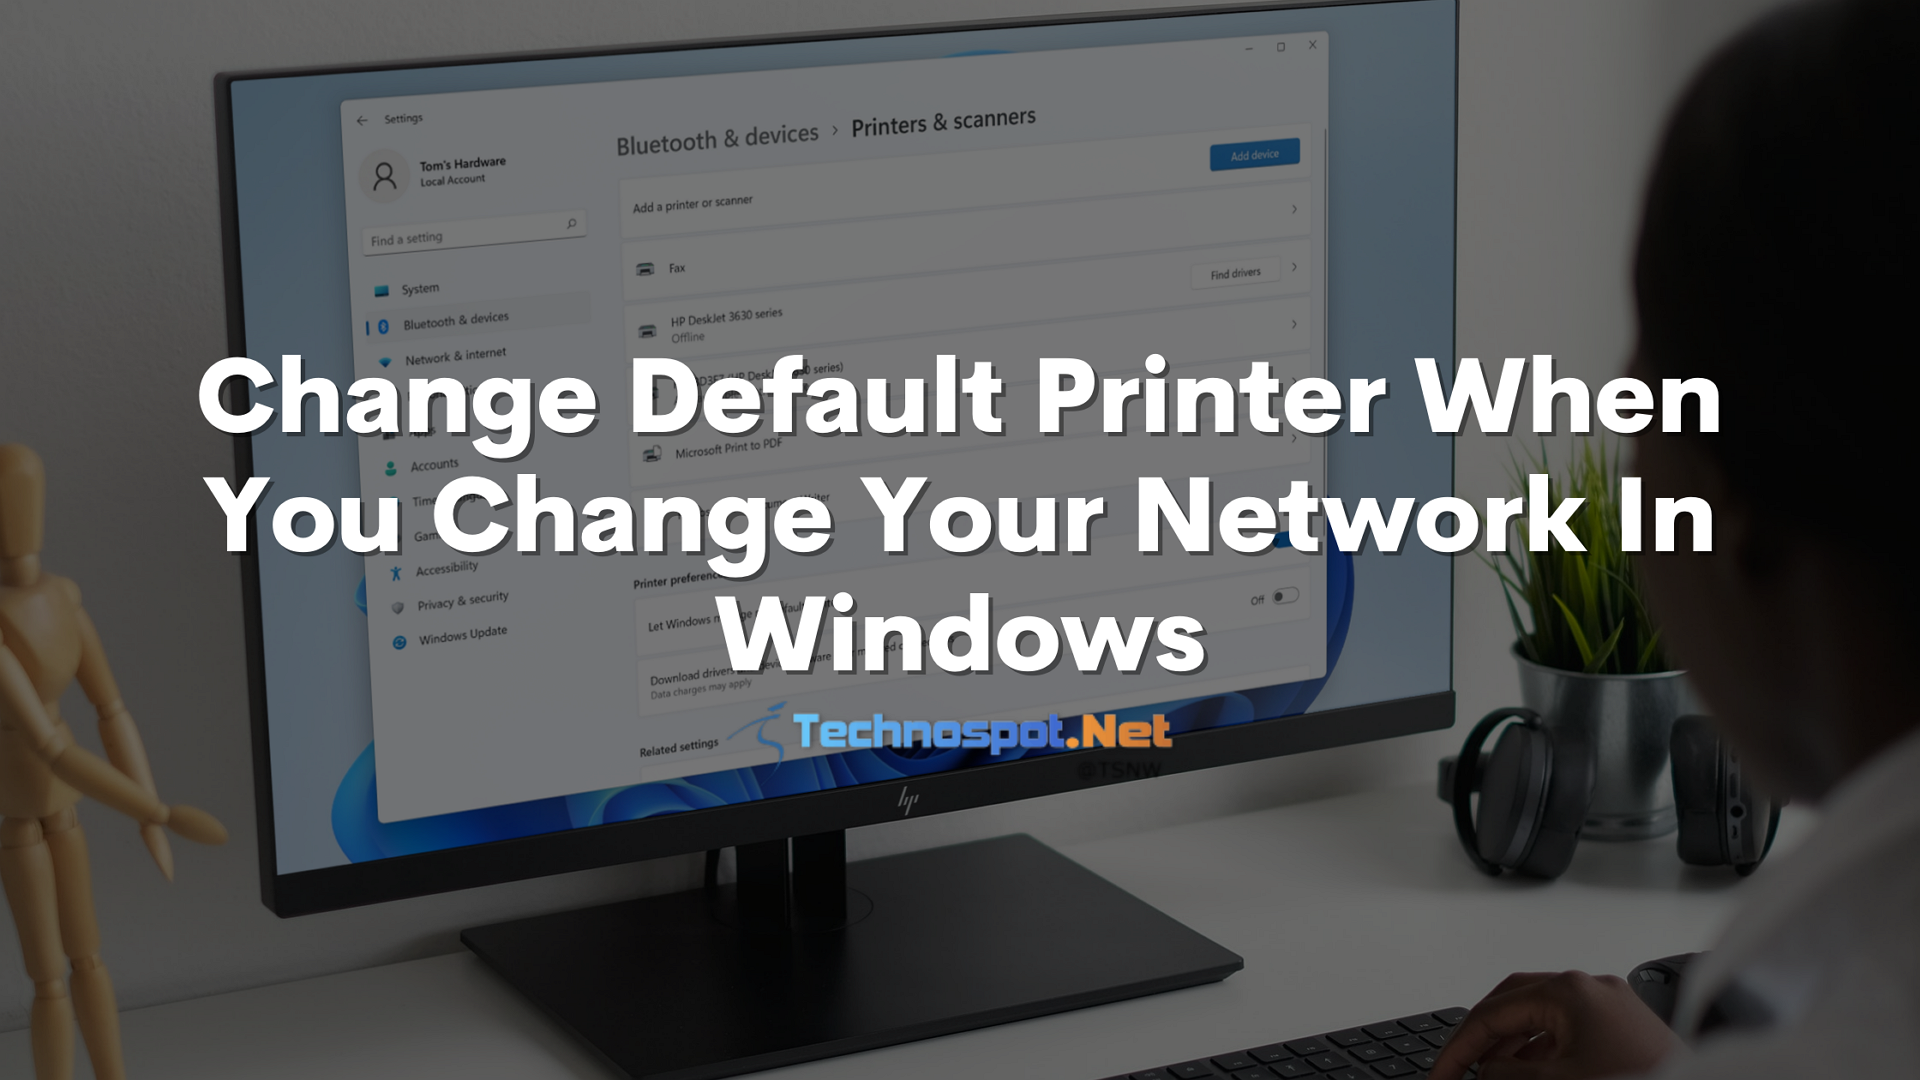 Change Default Printer When You Change Your Network In Windows